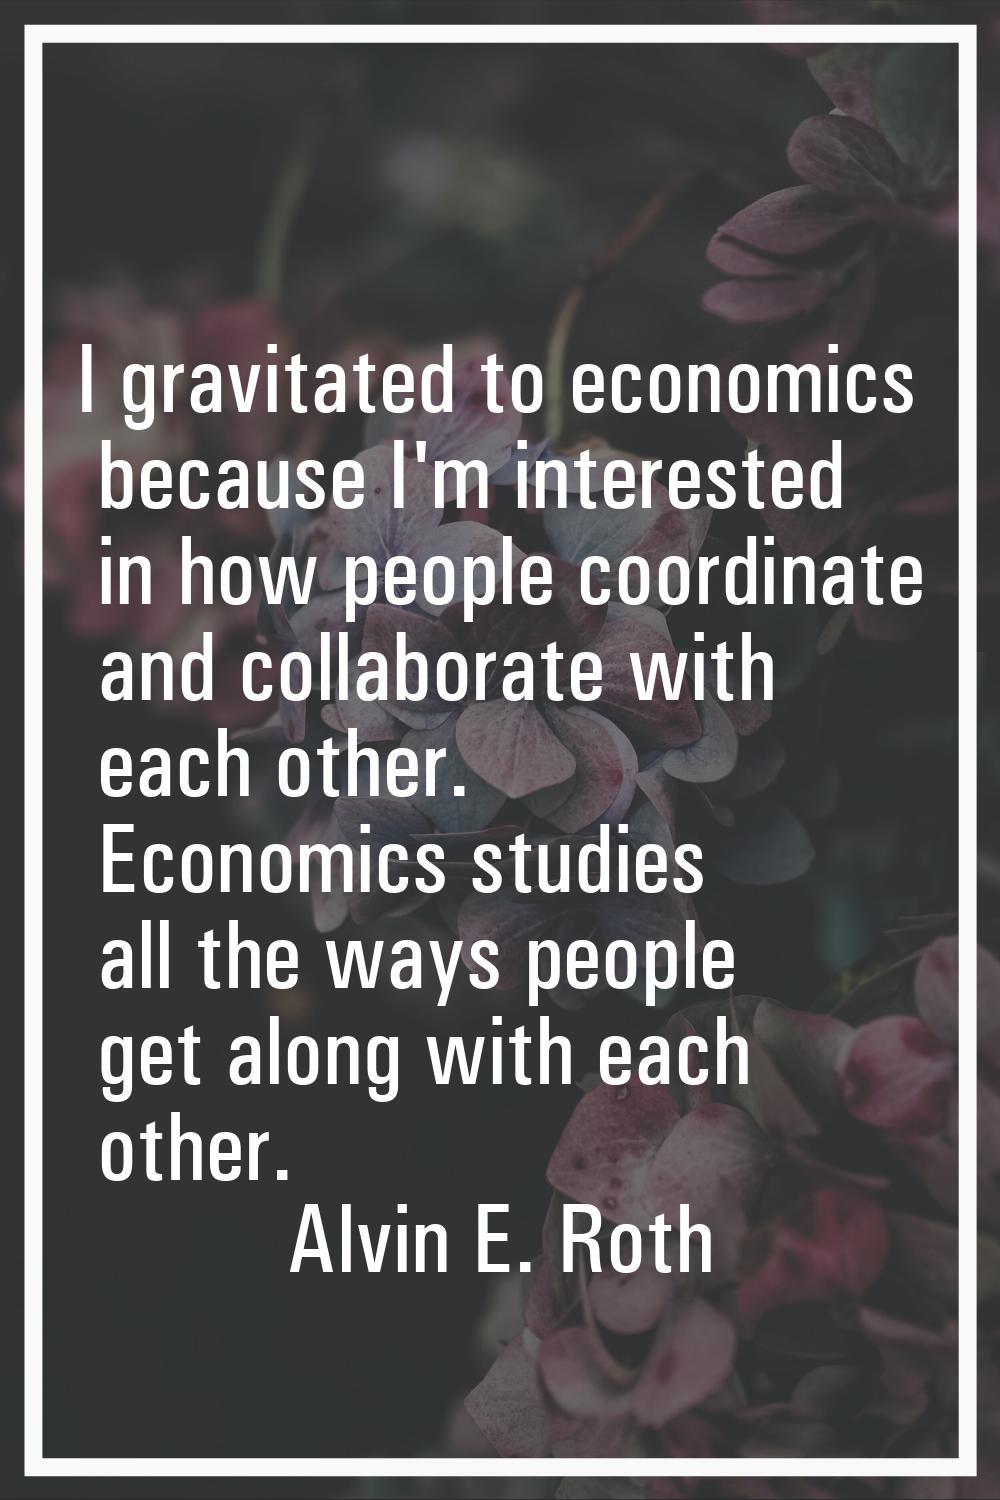 I gravitated to economics because I'm interested in how people coordinate and collaborate with each